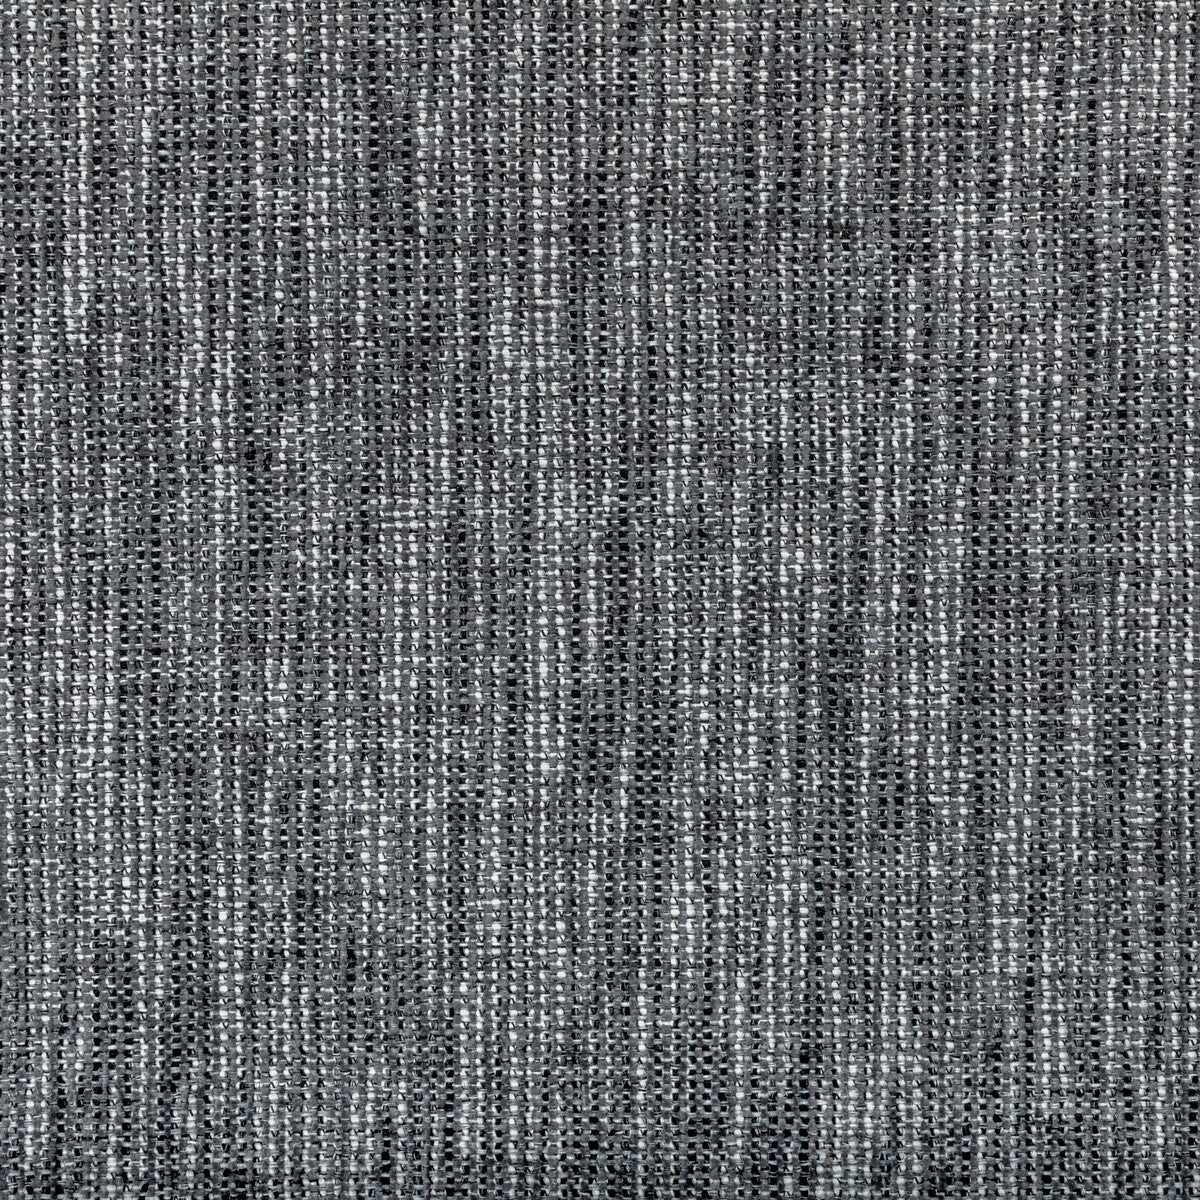 Standford fabric in charcoal color - pattern 33406.81.0 - by Kravet Basics